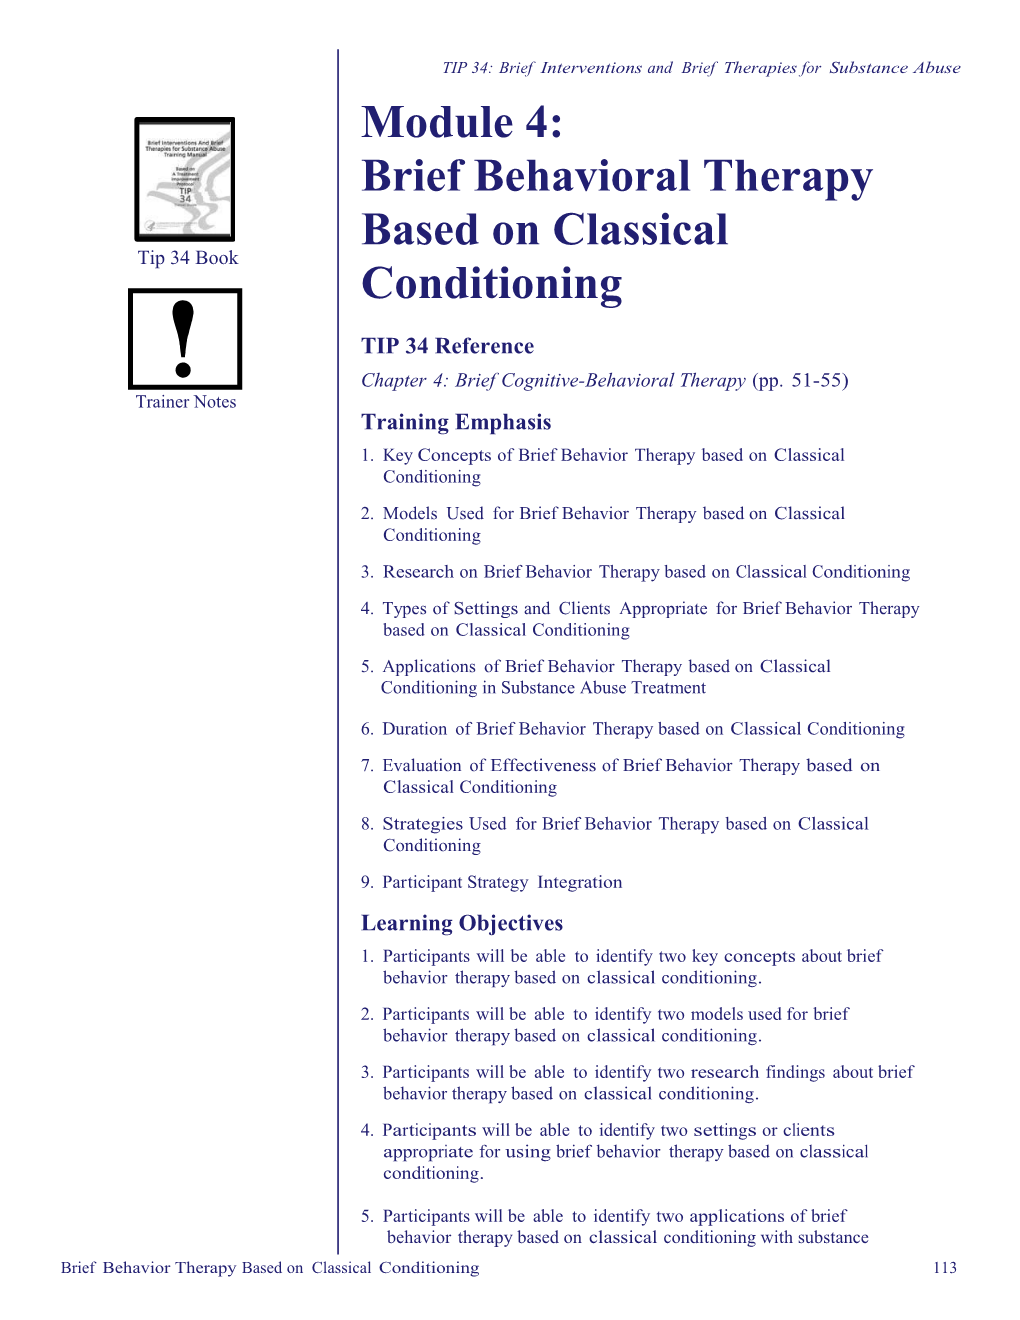 Brief Behavioral Therapy Based Onclassical Conditioning